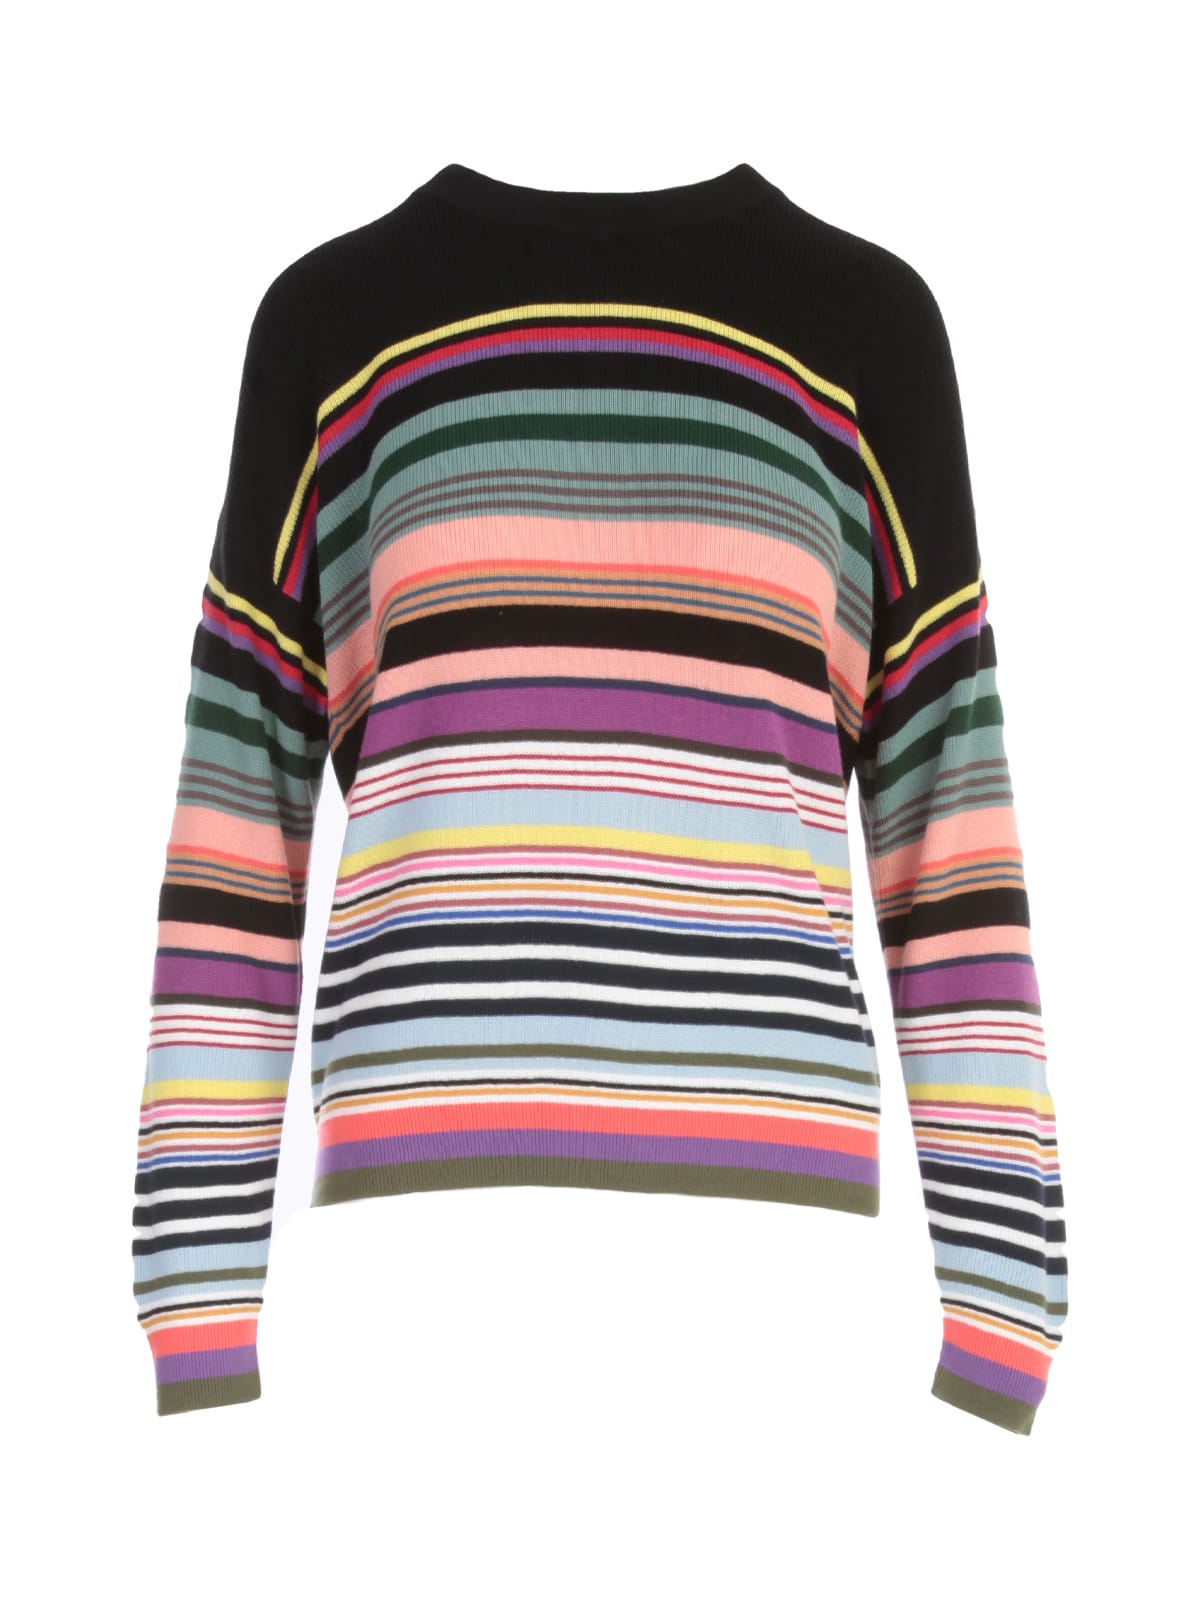 PS by Paul Smith Knitted Jumper